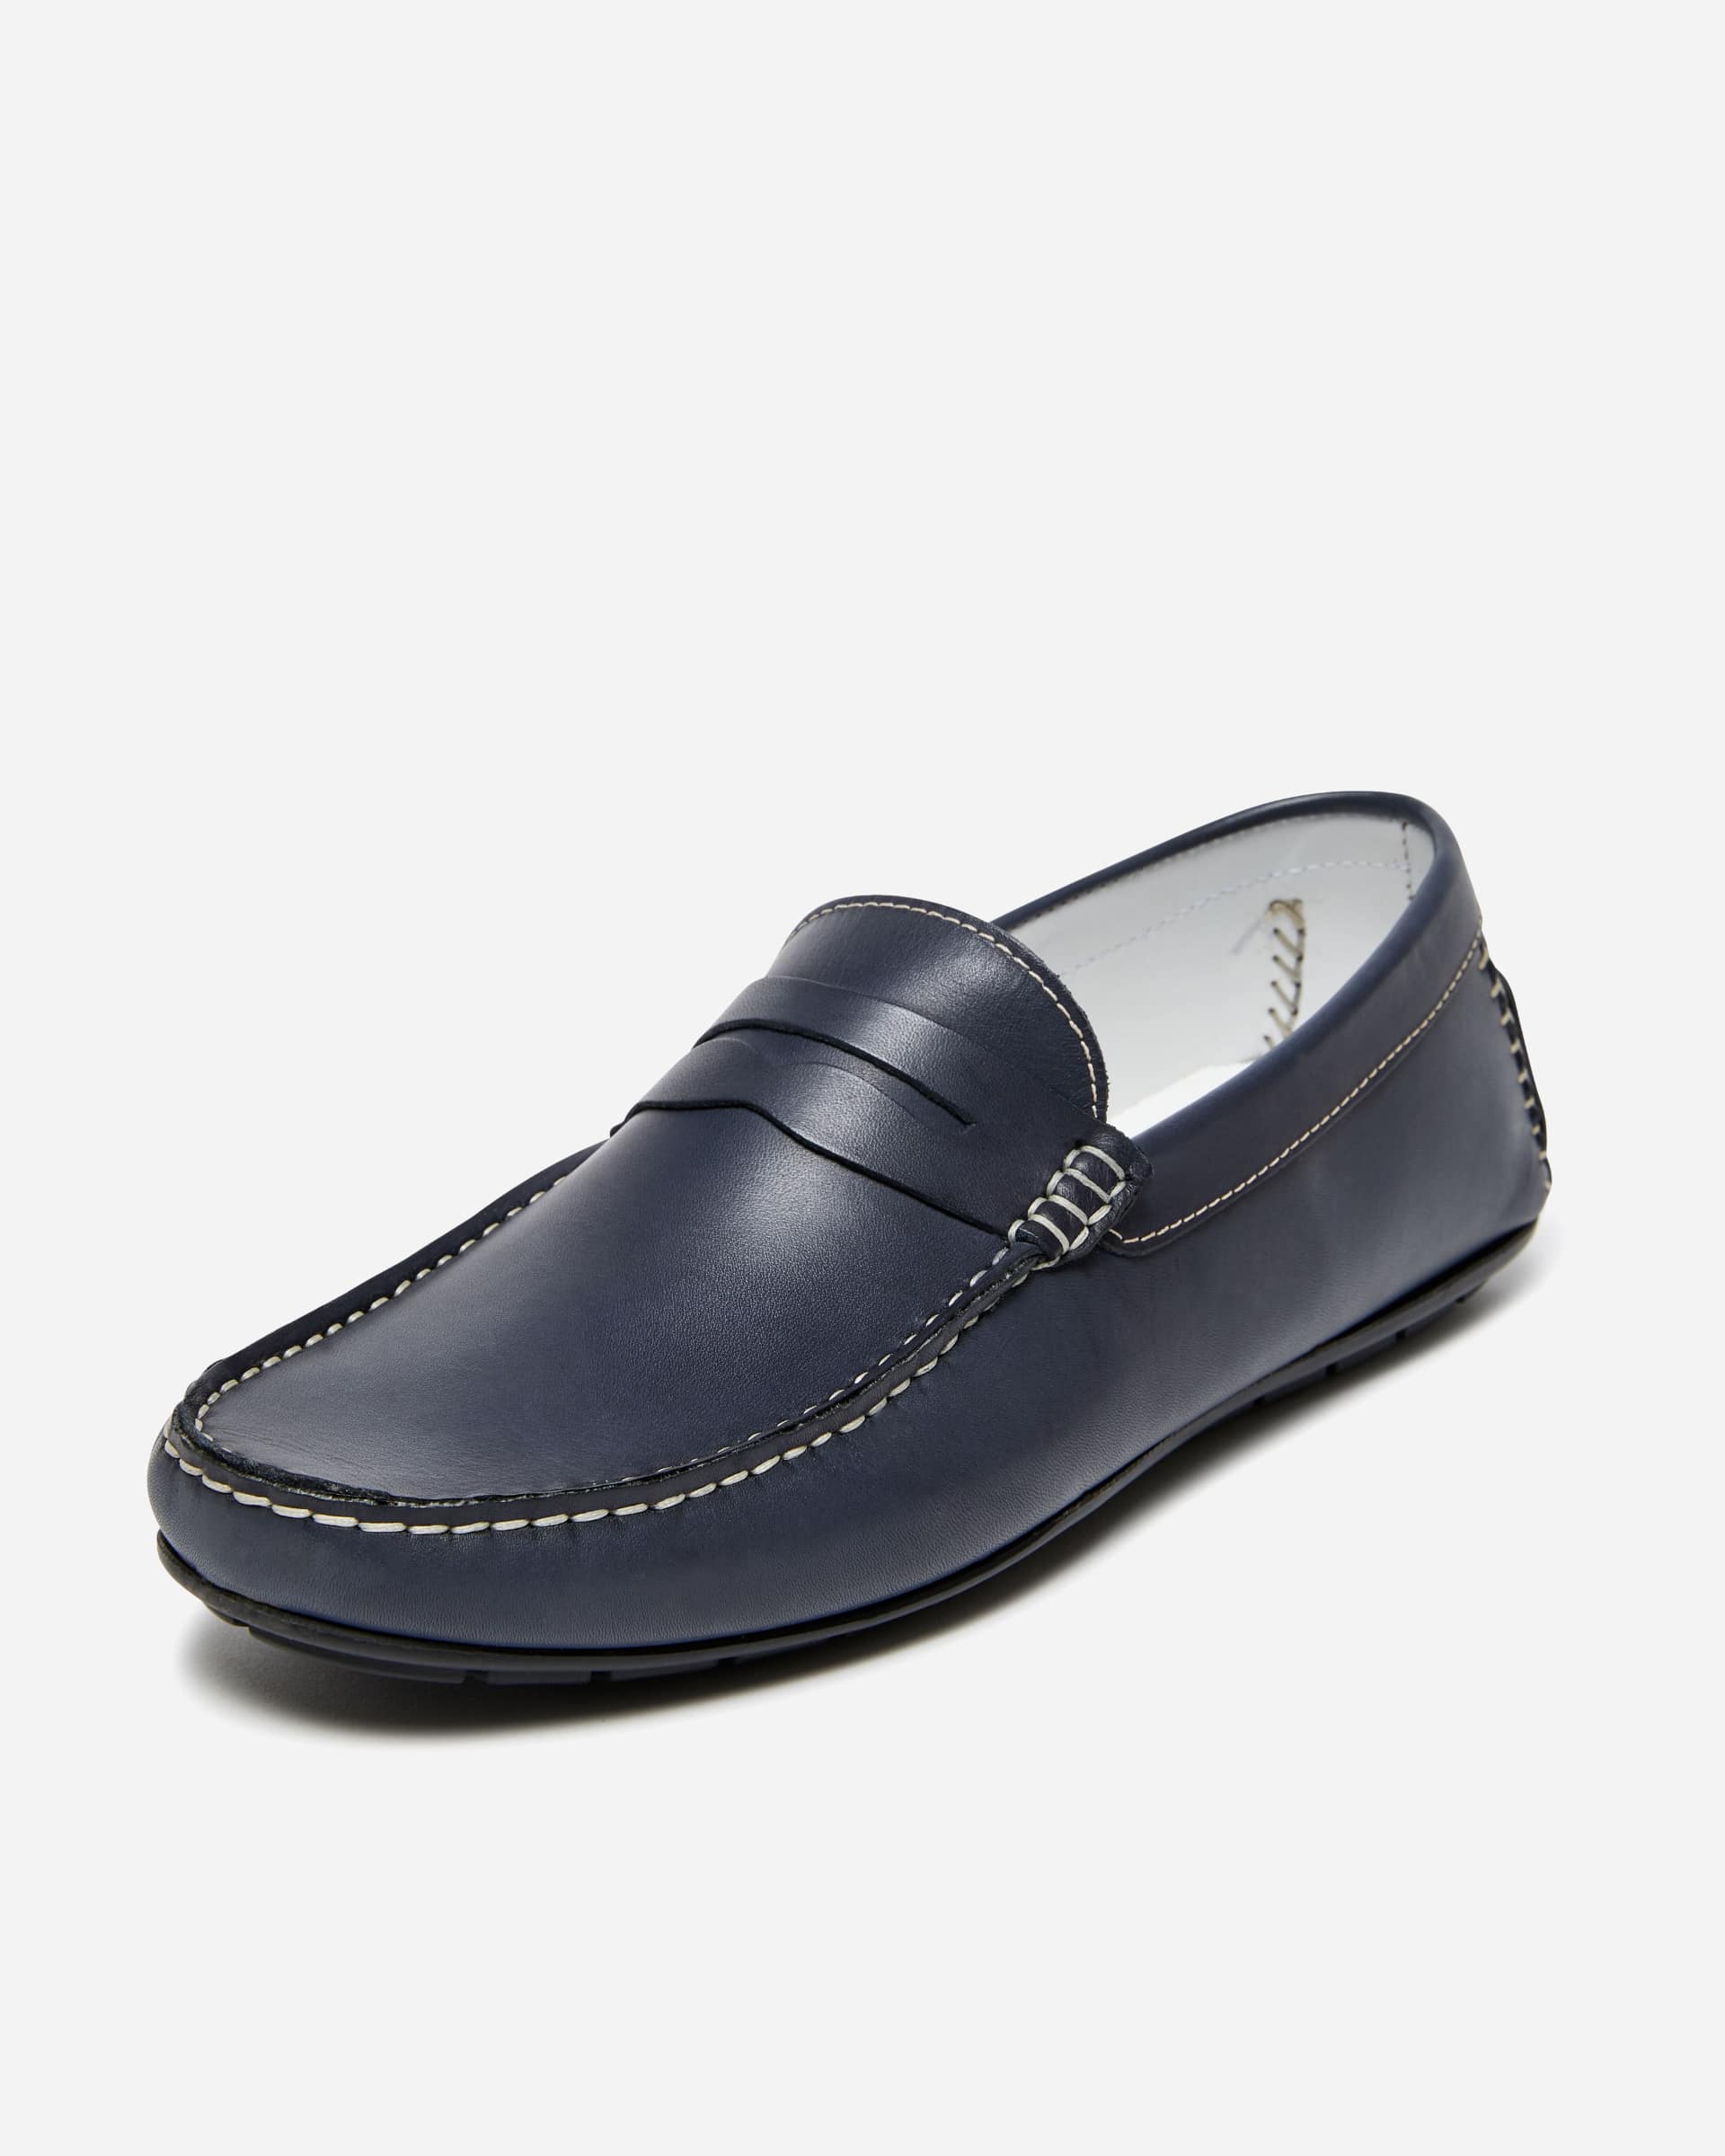 City Penny Loafers - Men's Loafers at Menzclub